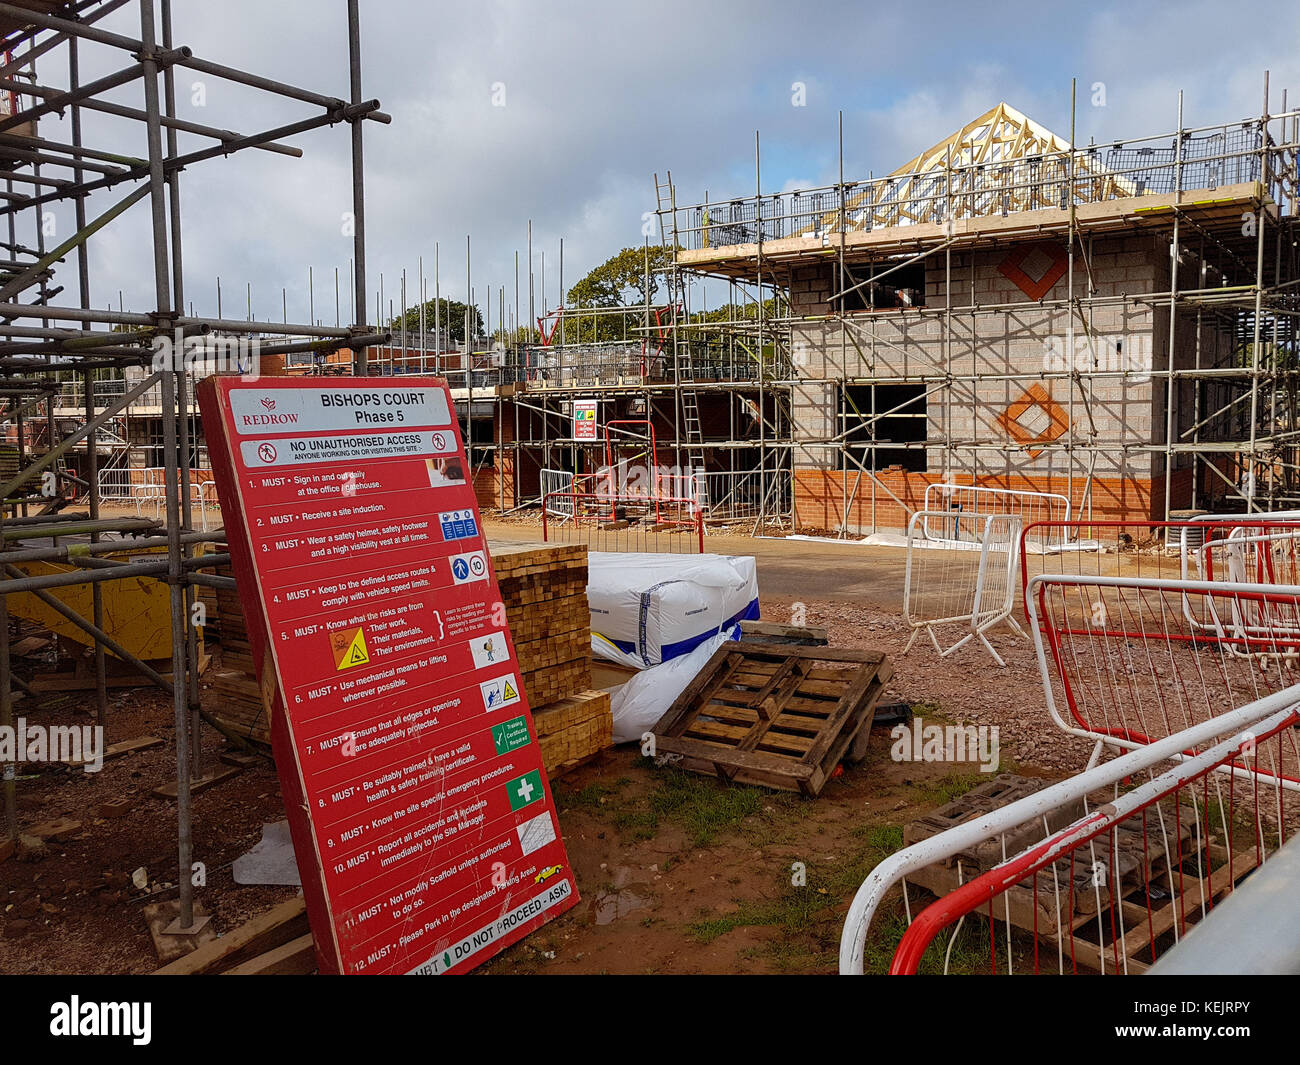 Exeter, England, UK - October 2017: A sign warns of no unauthorized access and health and safety rules for a Redrow housing development called Bishops Stock Photo